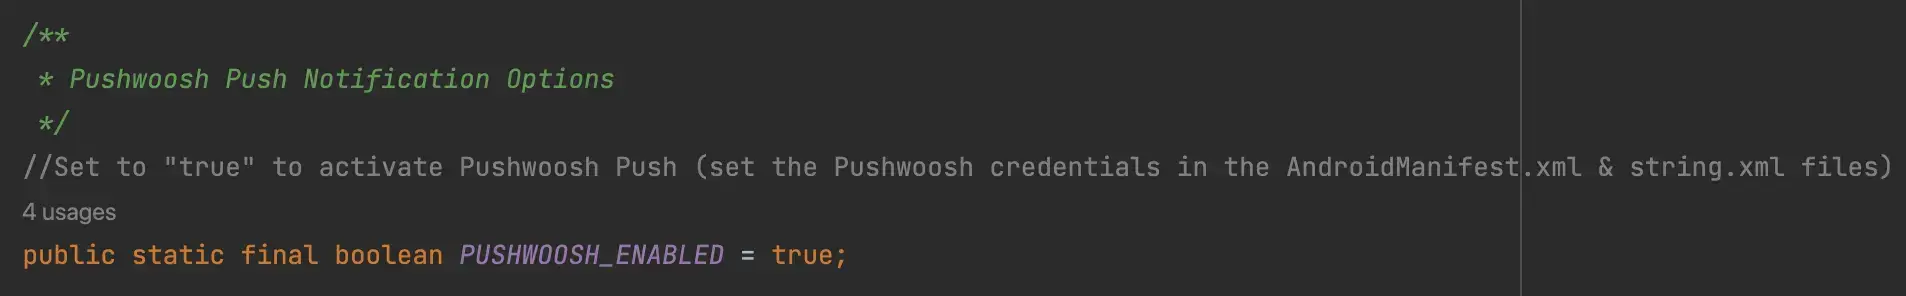 Send a new push notification to your app users with Pushwoosh